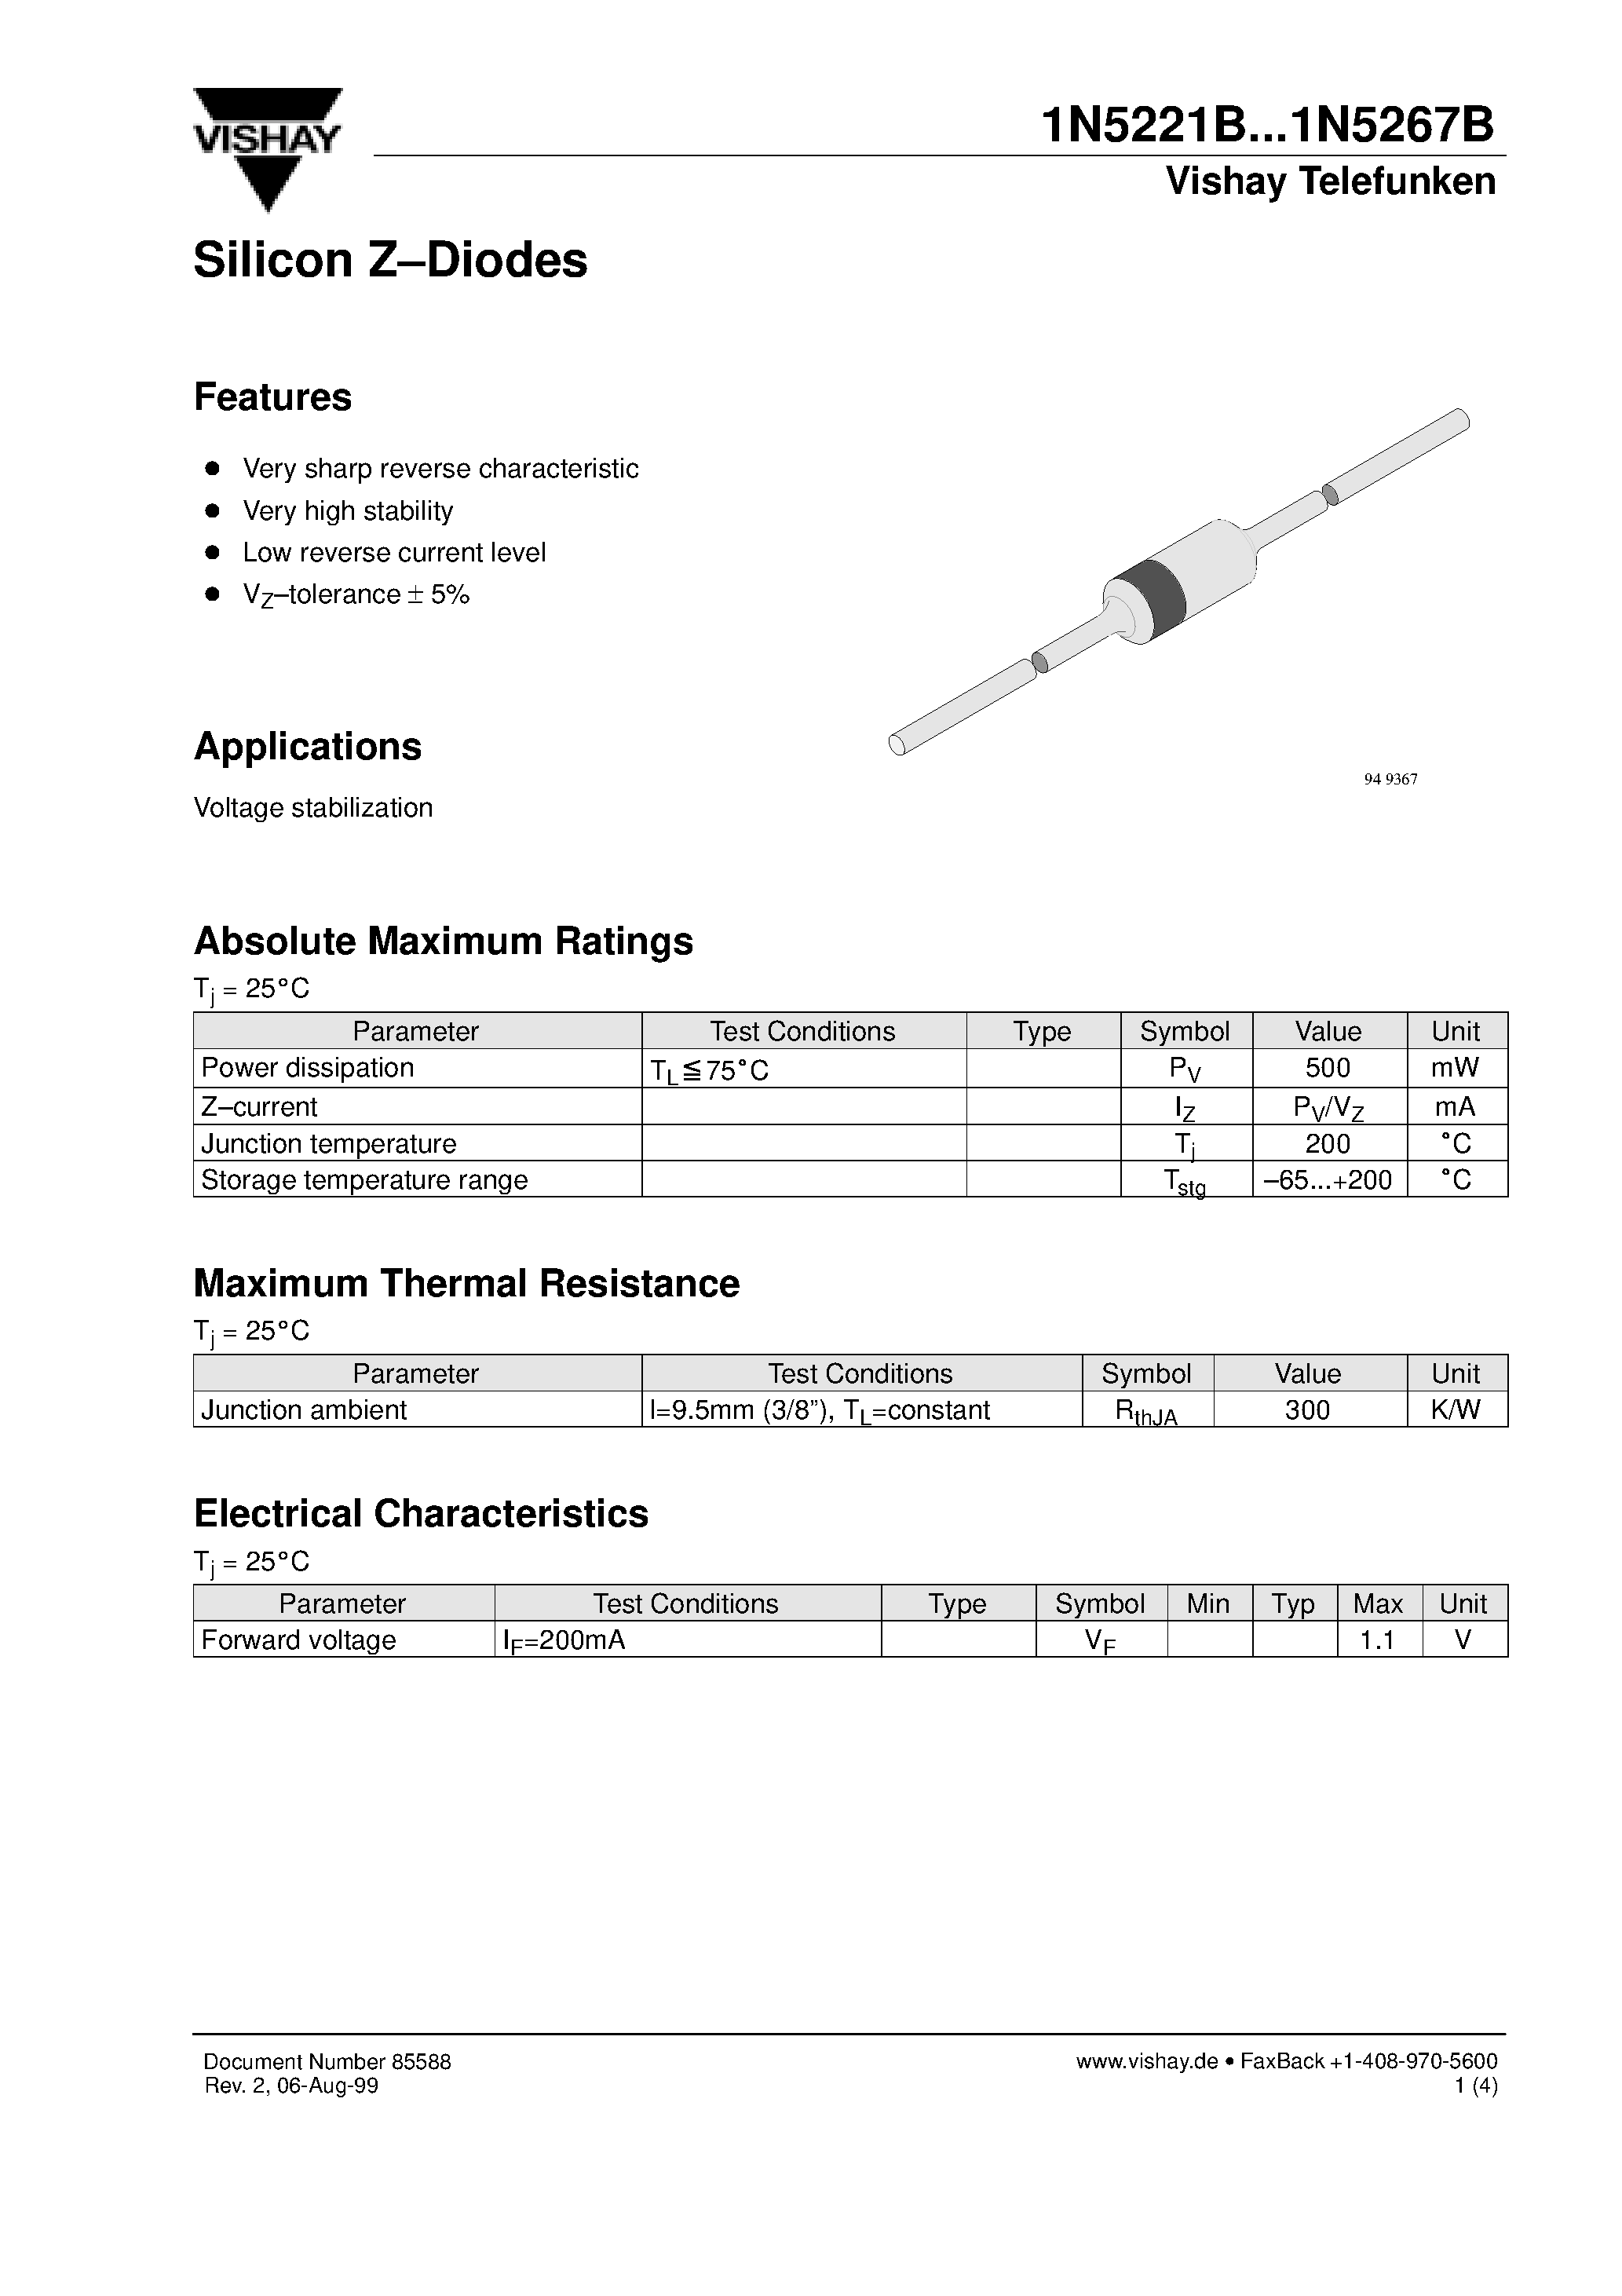 Datasheet 1N5248B - Silicon Z-Diodes page 1